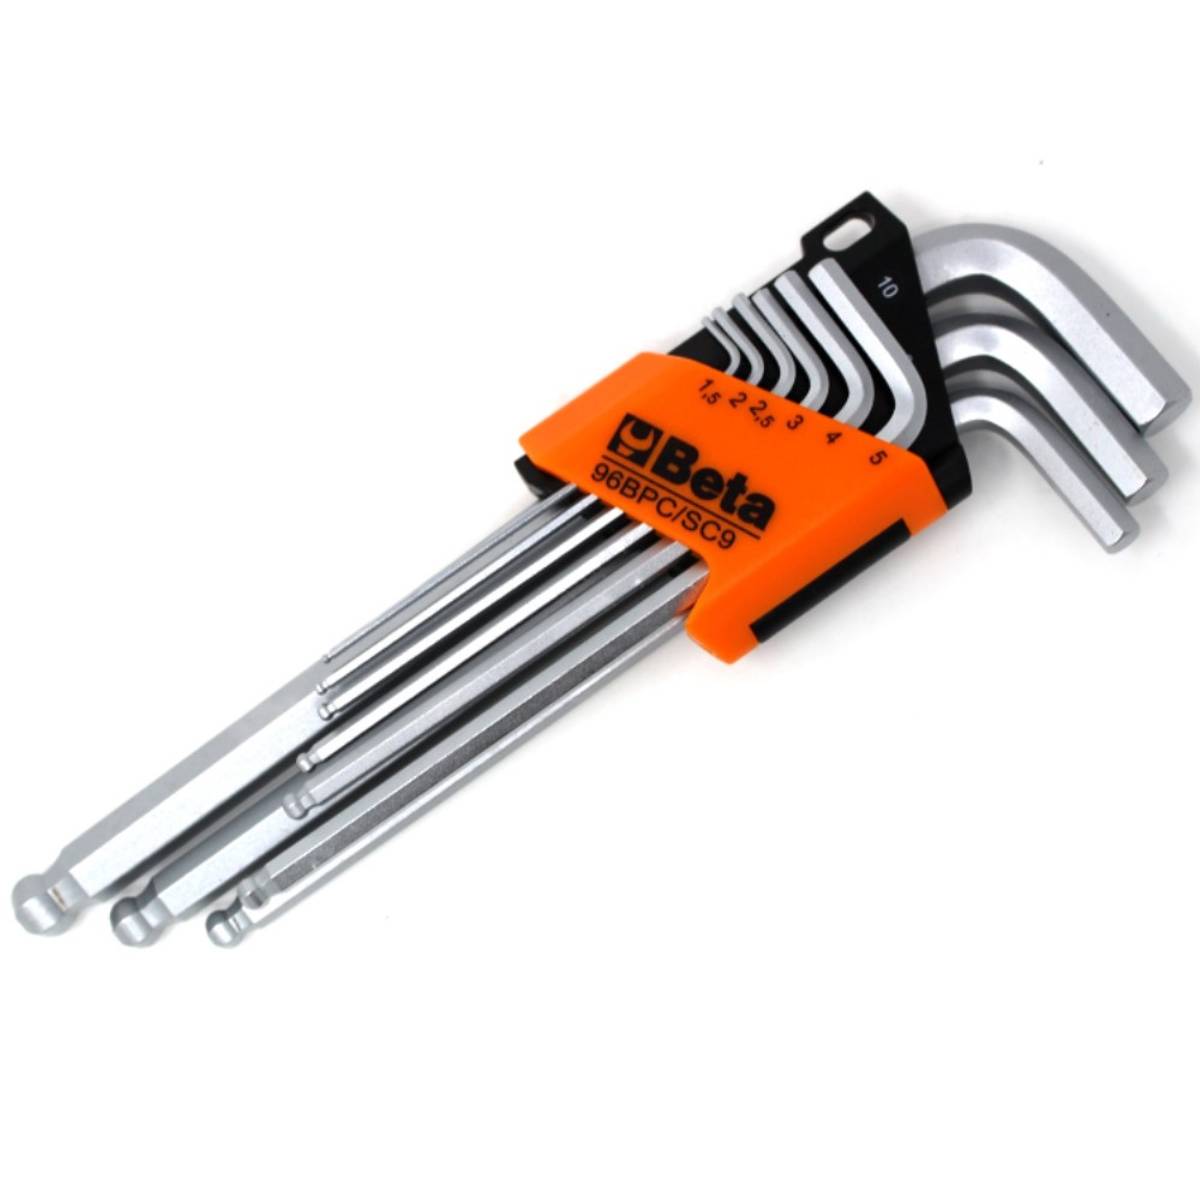 Set of 9 bent hexagonal male wrenches with one spherical end - Beta 96BPC/SC9